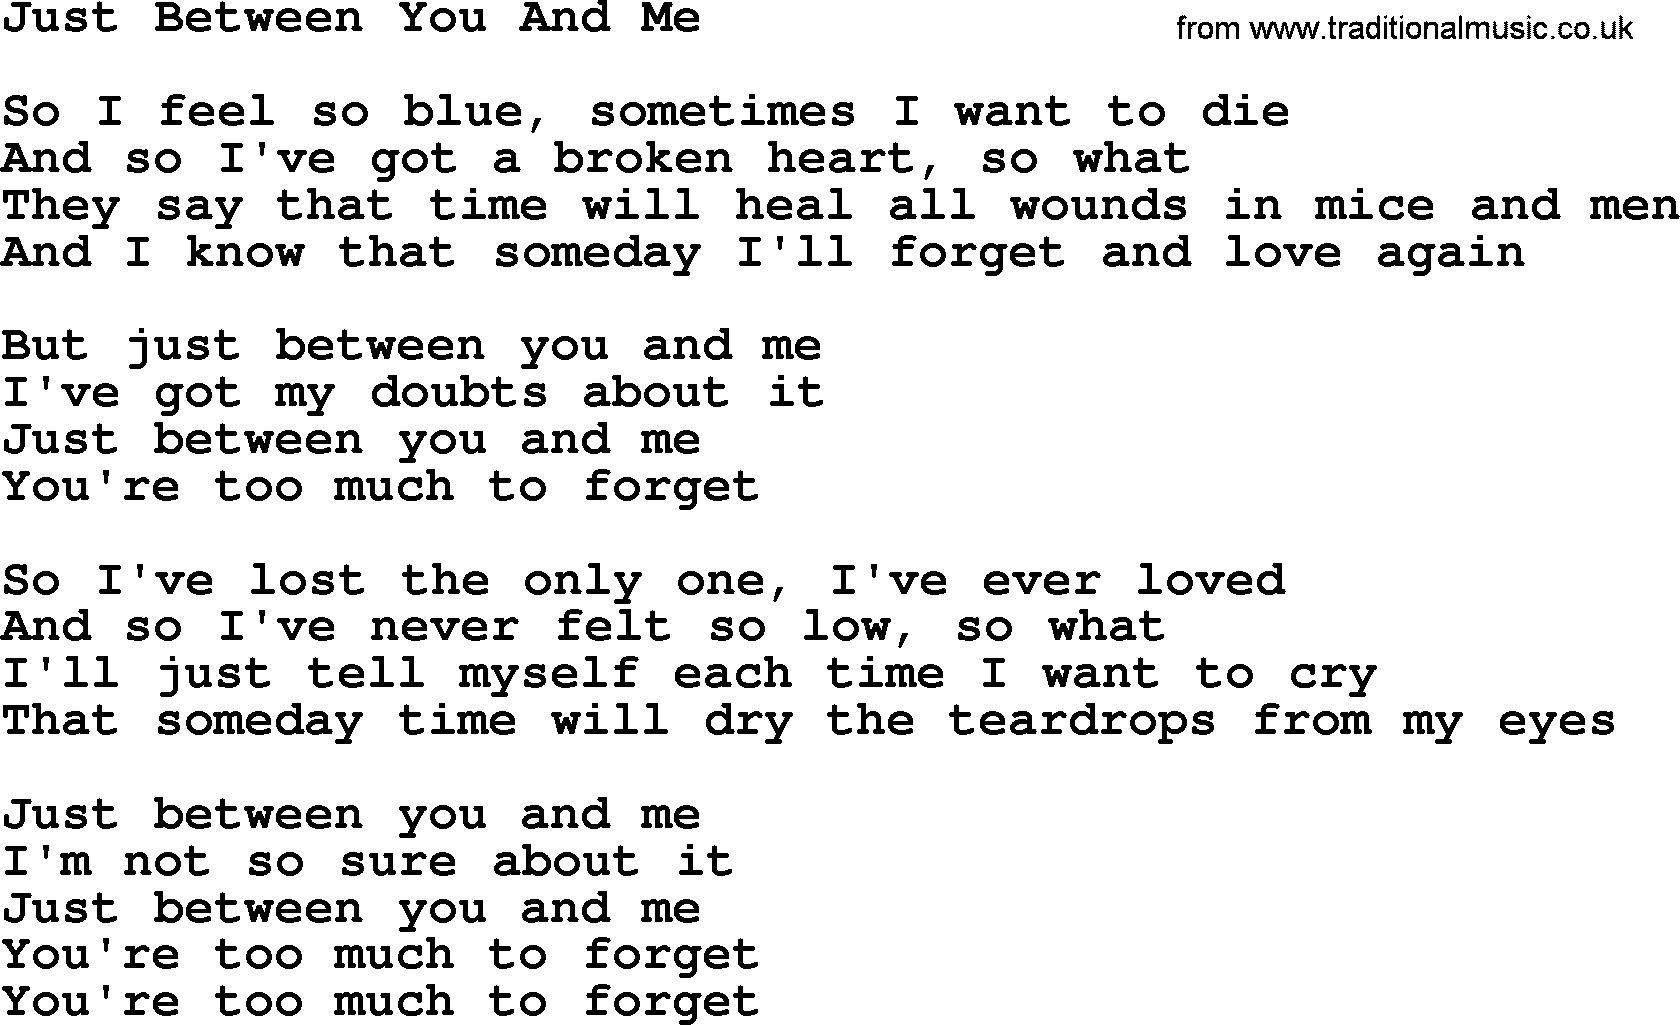 Dolly Parton song Just Between You And Me.txt lyrics